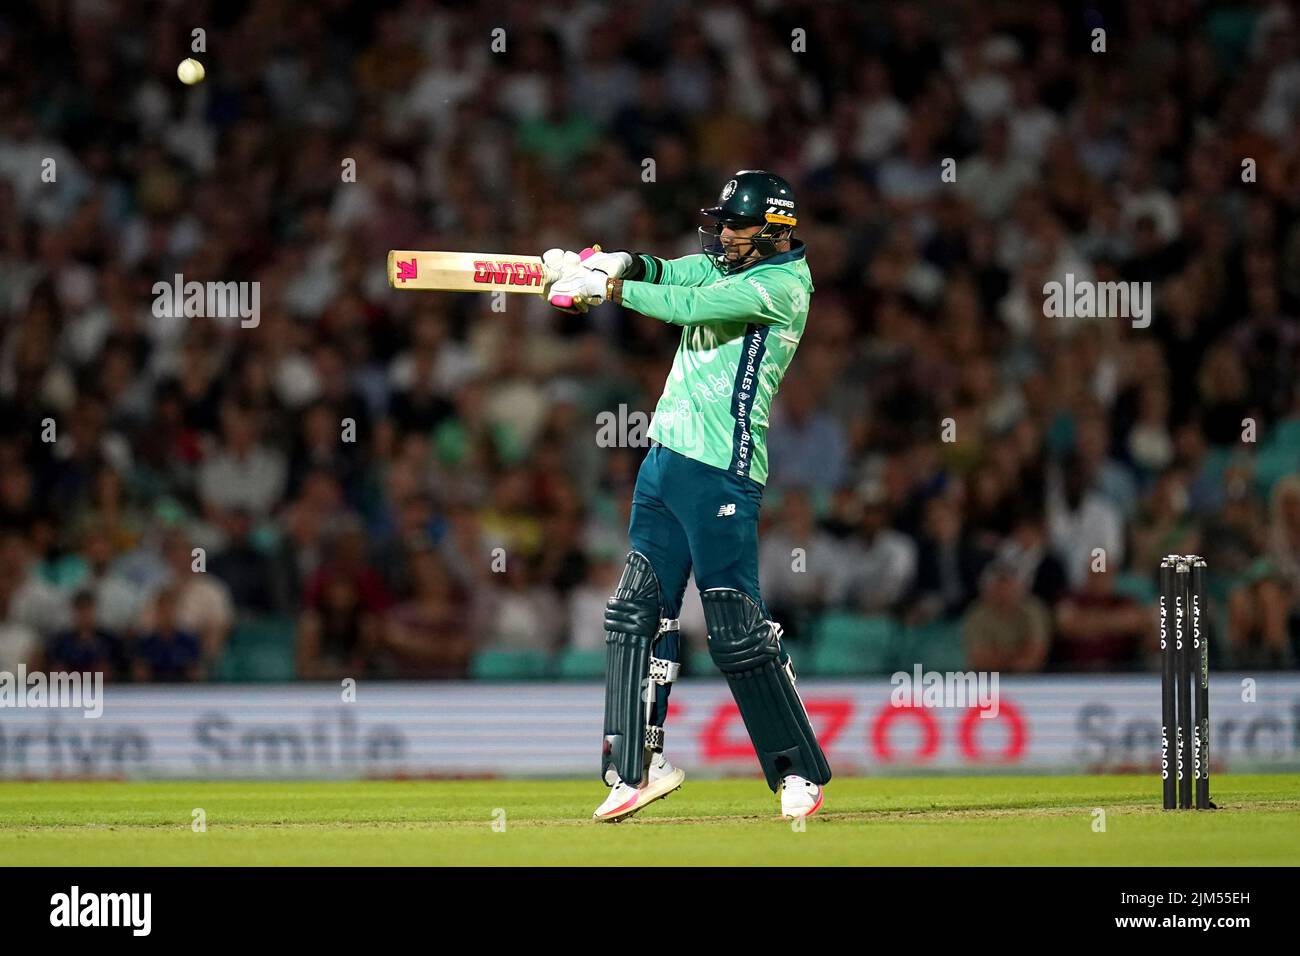 Oval Invincible's Sunil Narine batting during The Hundred match at The Kia Oval, London. Picture date: Thursday August 4, 2022. Stock Photo